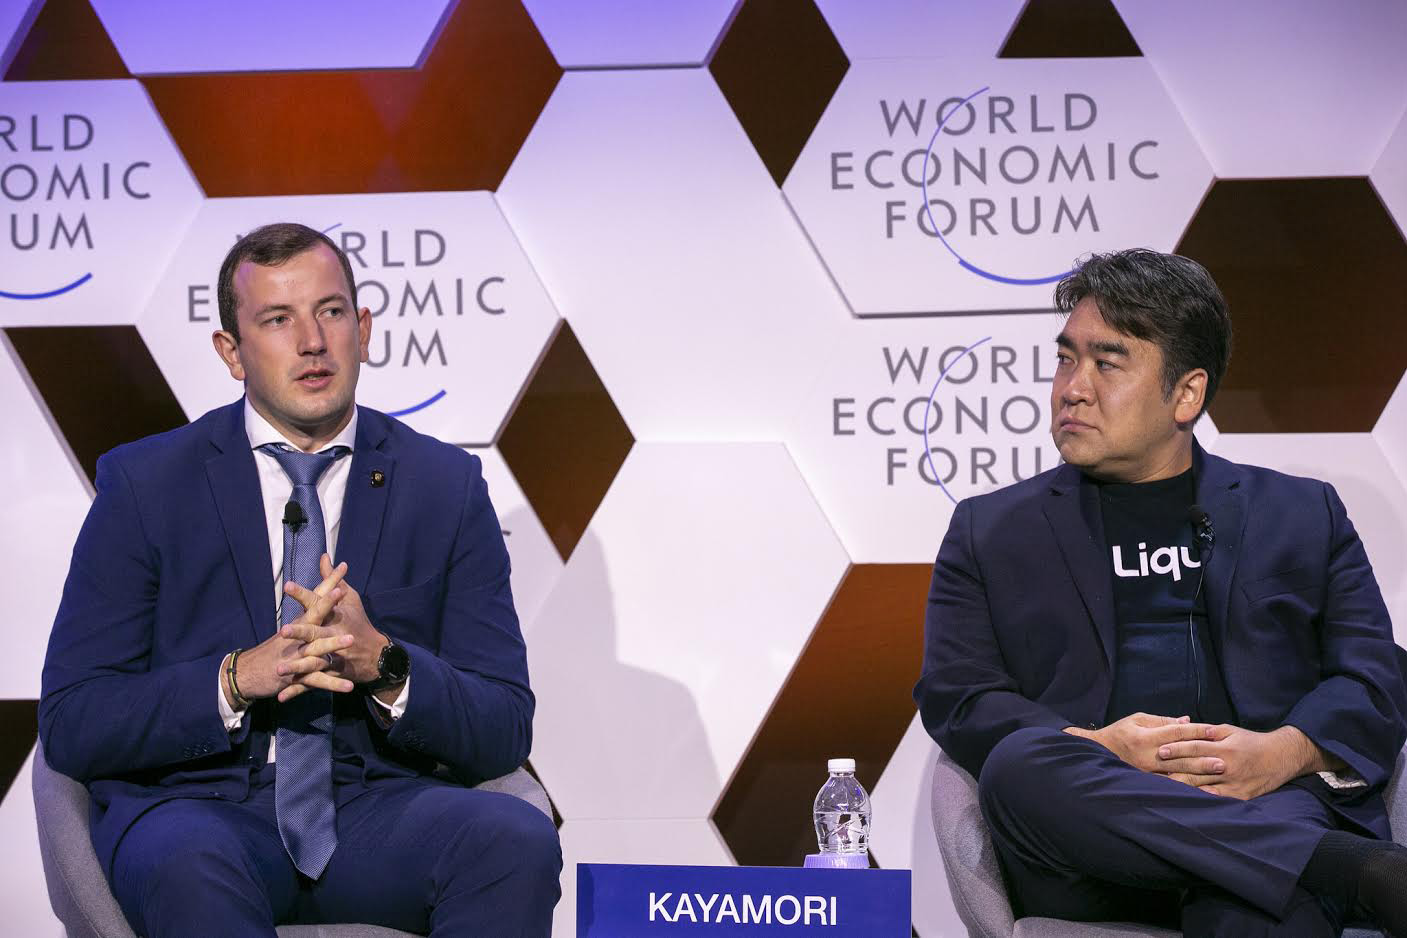 Mike Kayamori (right), CEO of Quoine Pte. Ltd., a Tokyo-based firm that runs a bitcoin exchange, attends a session on cryptocurrency as a panelist during the World Economic Forum's Annual Meeting of the New Champions on Sept. 18 in Tianjin, China. | WORLD ECONOMIC FORUM